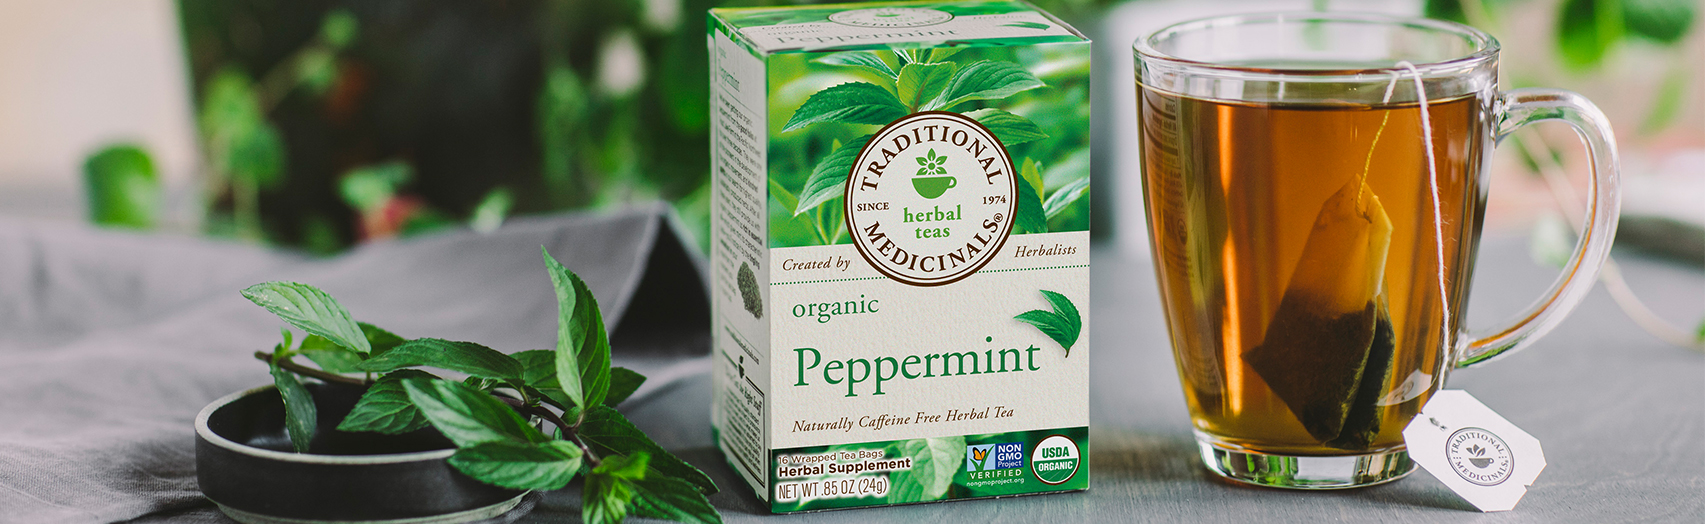 benefits and uses of peppermint tea